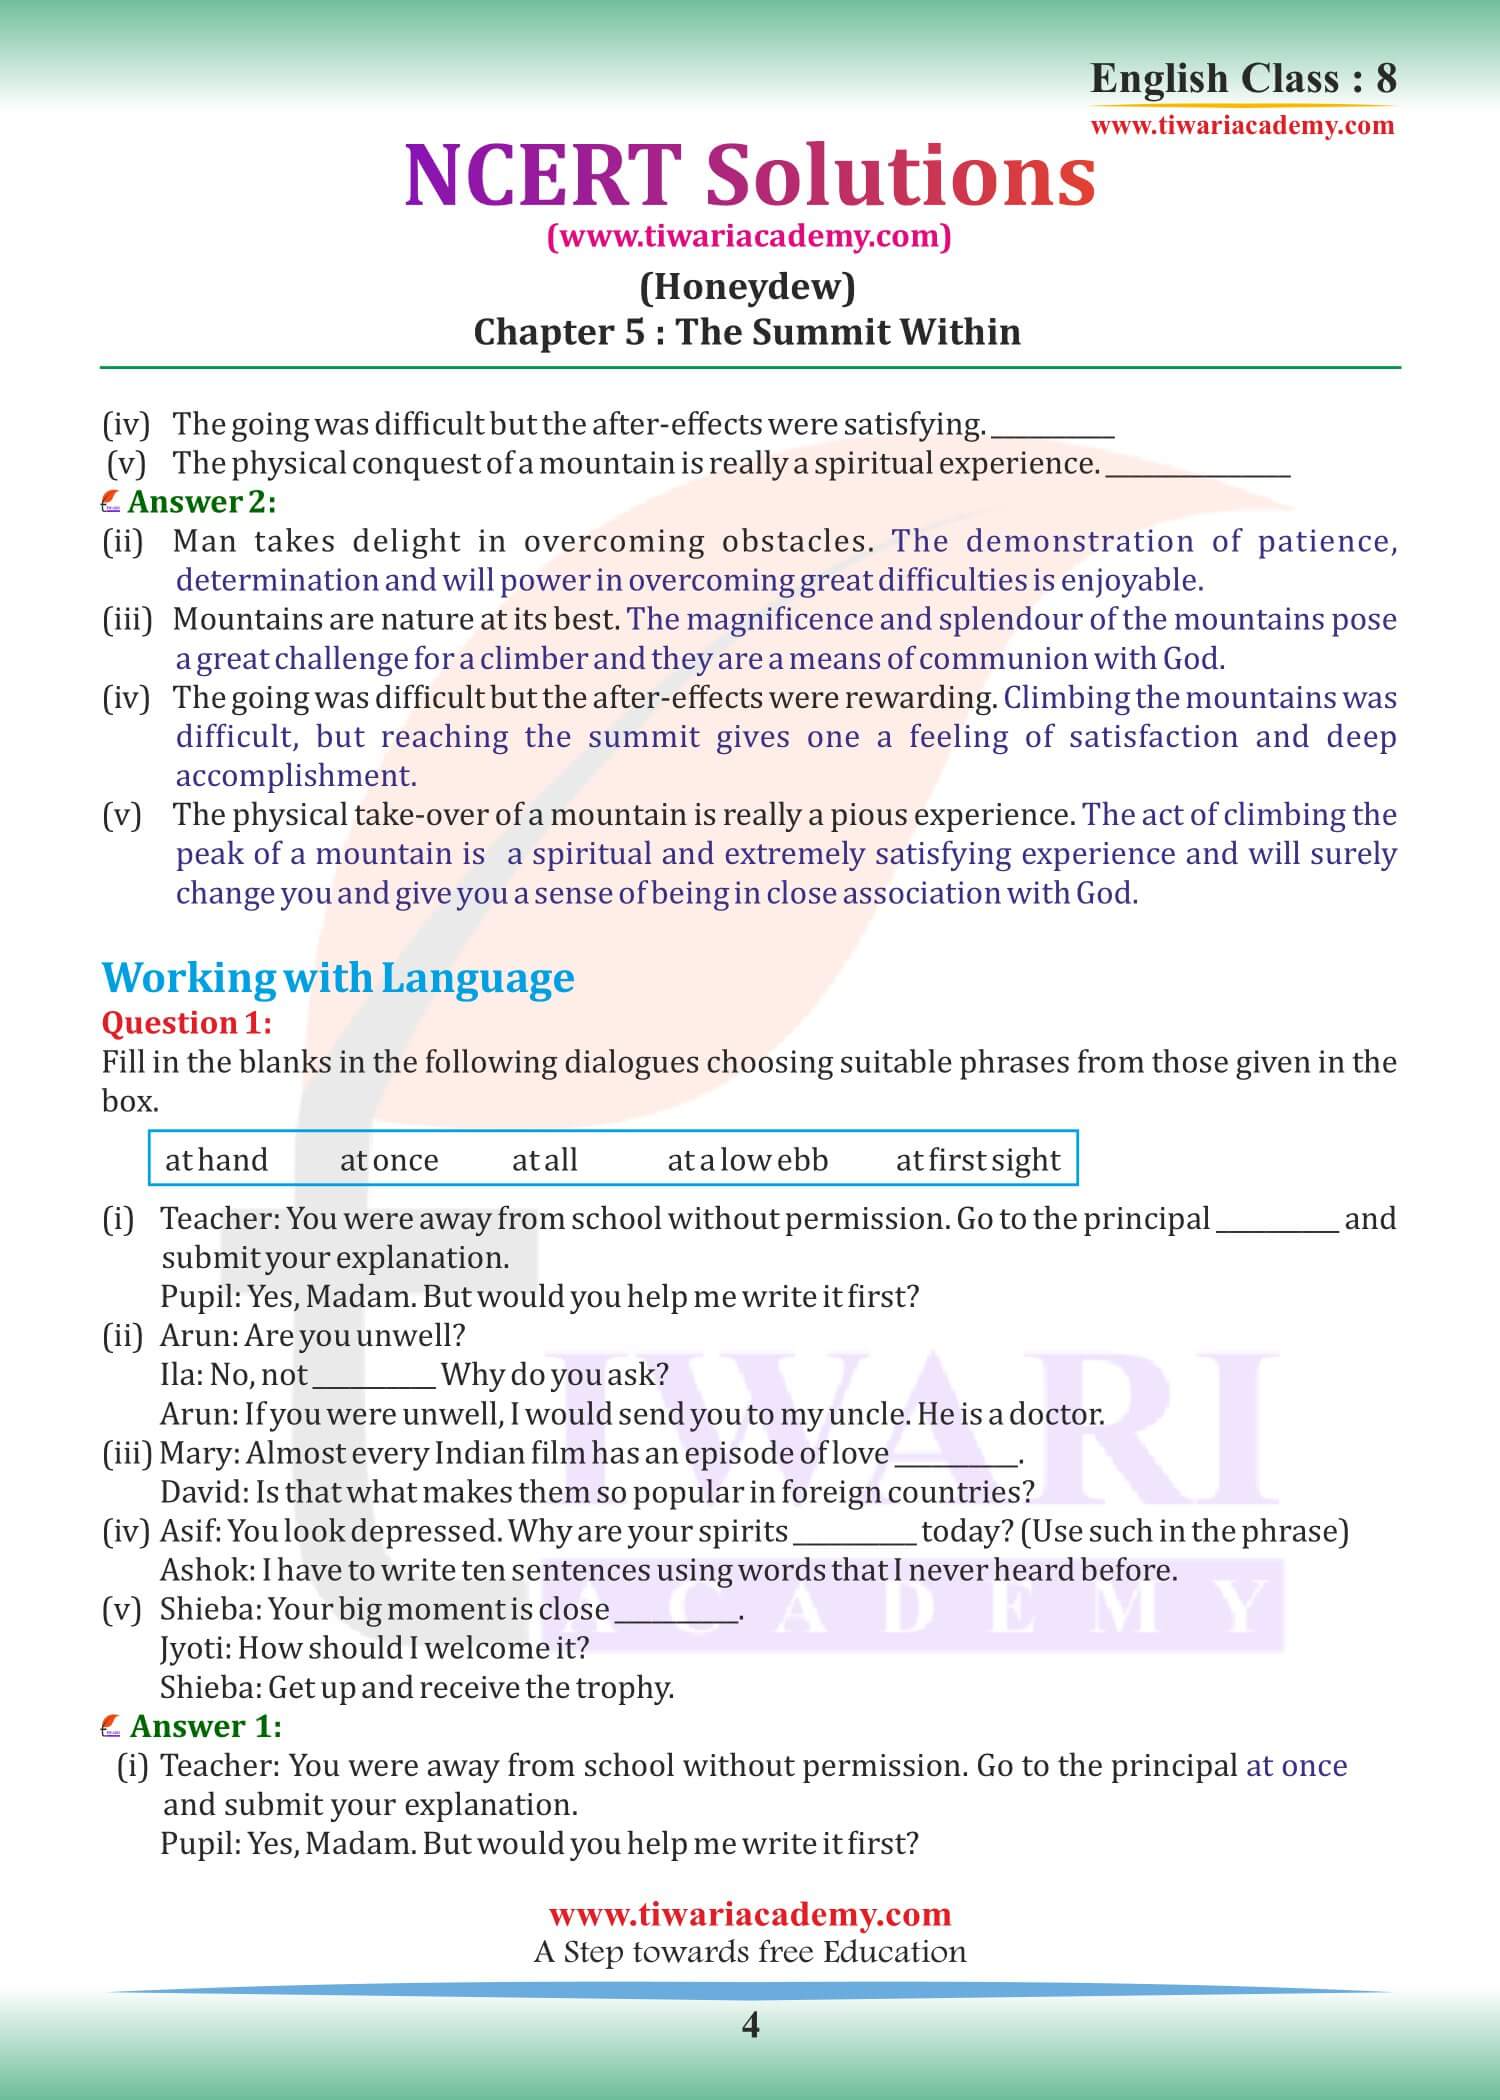 Class 8 English Honeydew Chapter 5 Revised and updated